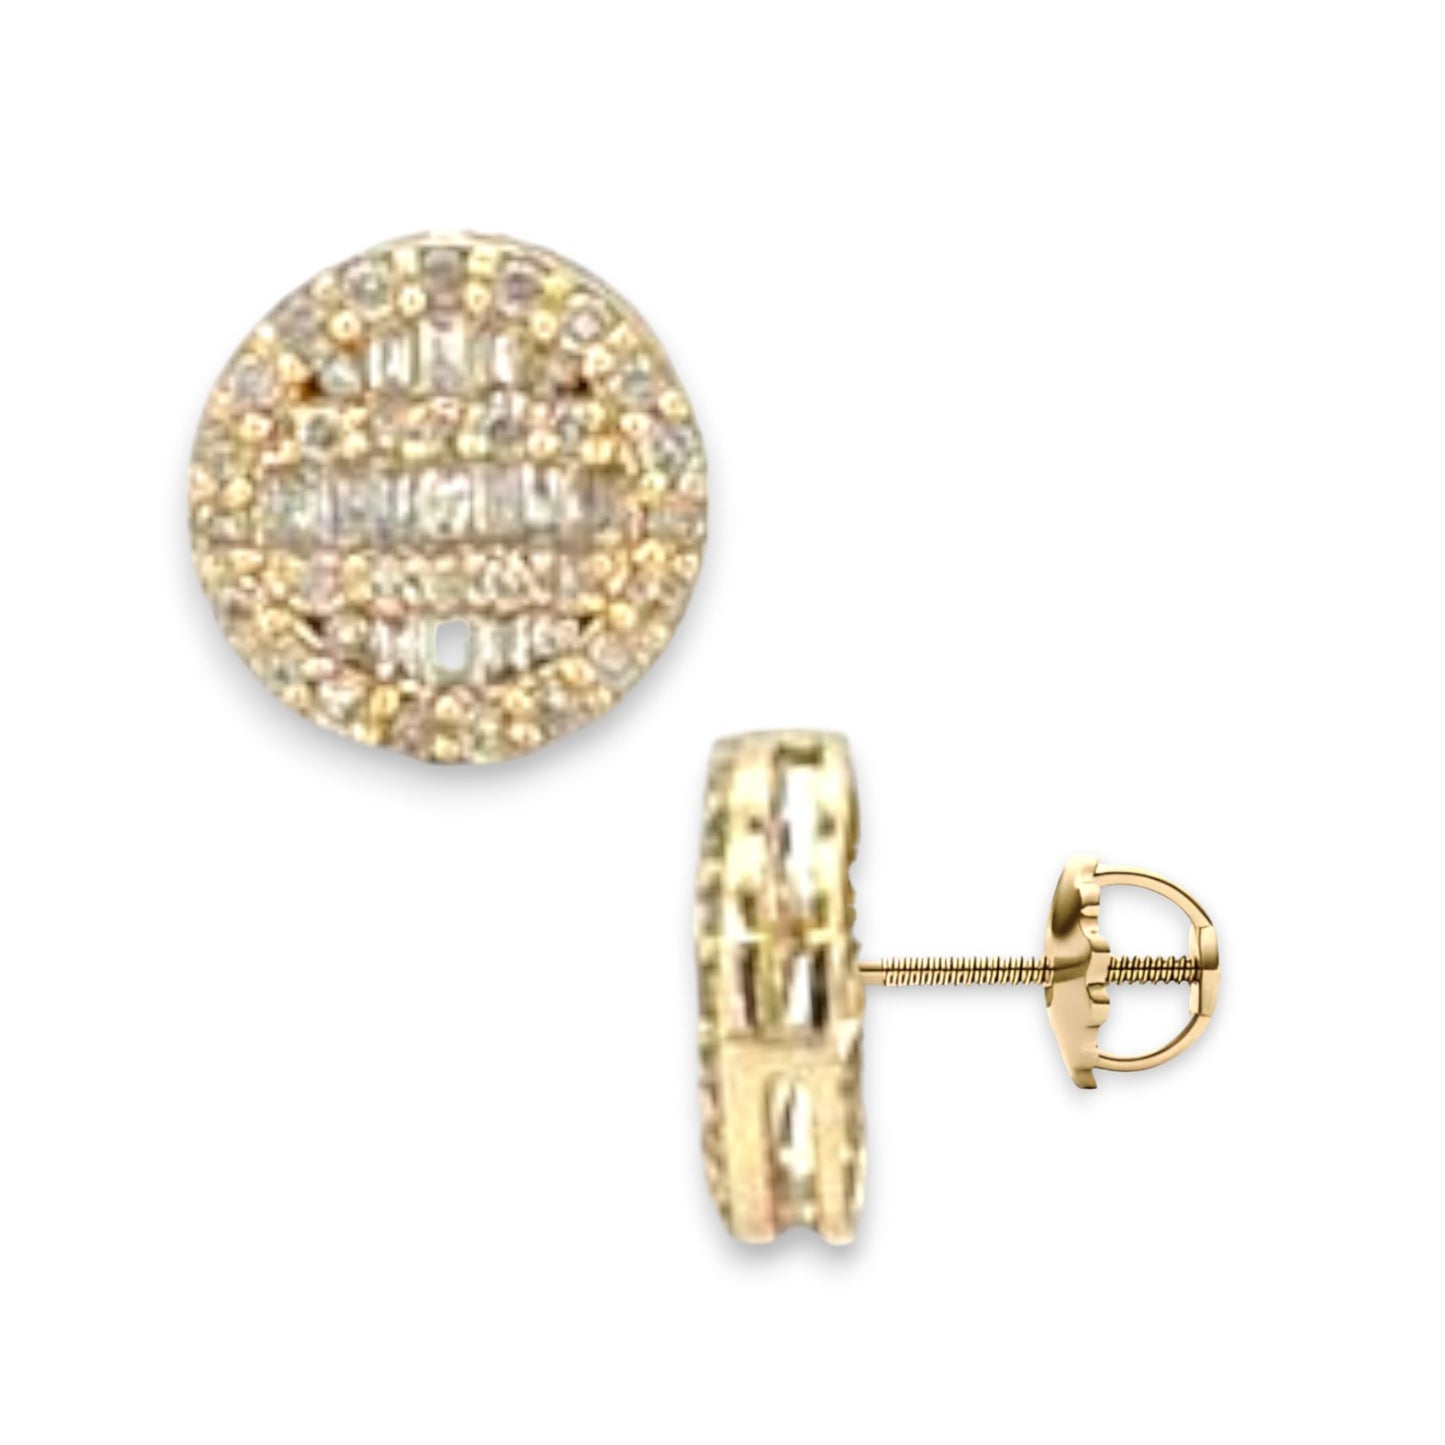 0.52ct Diamond Baguette and Round Stud Earrings - 14k Yellow Gold